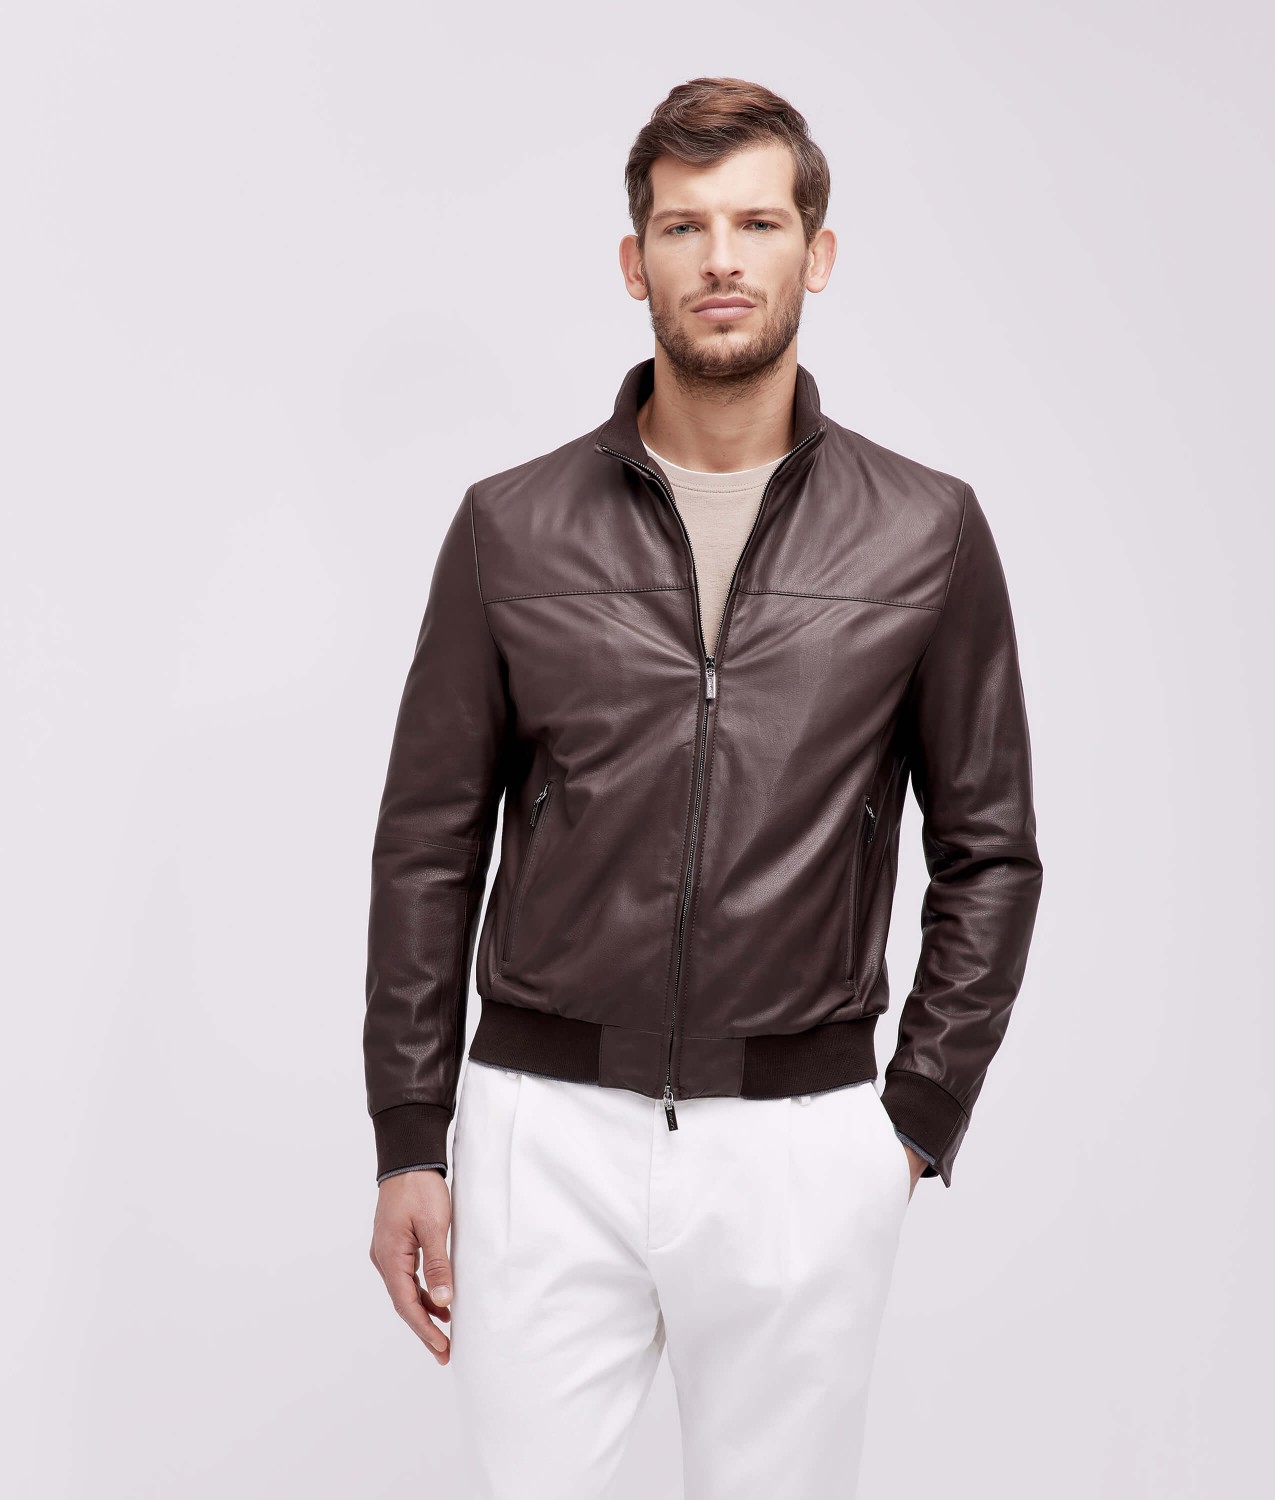 Men's brown leather jacket - Made in Italy - Gimo's